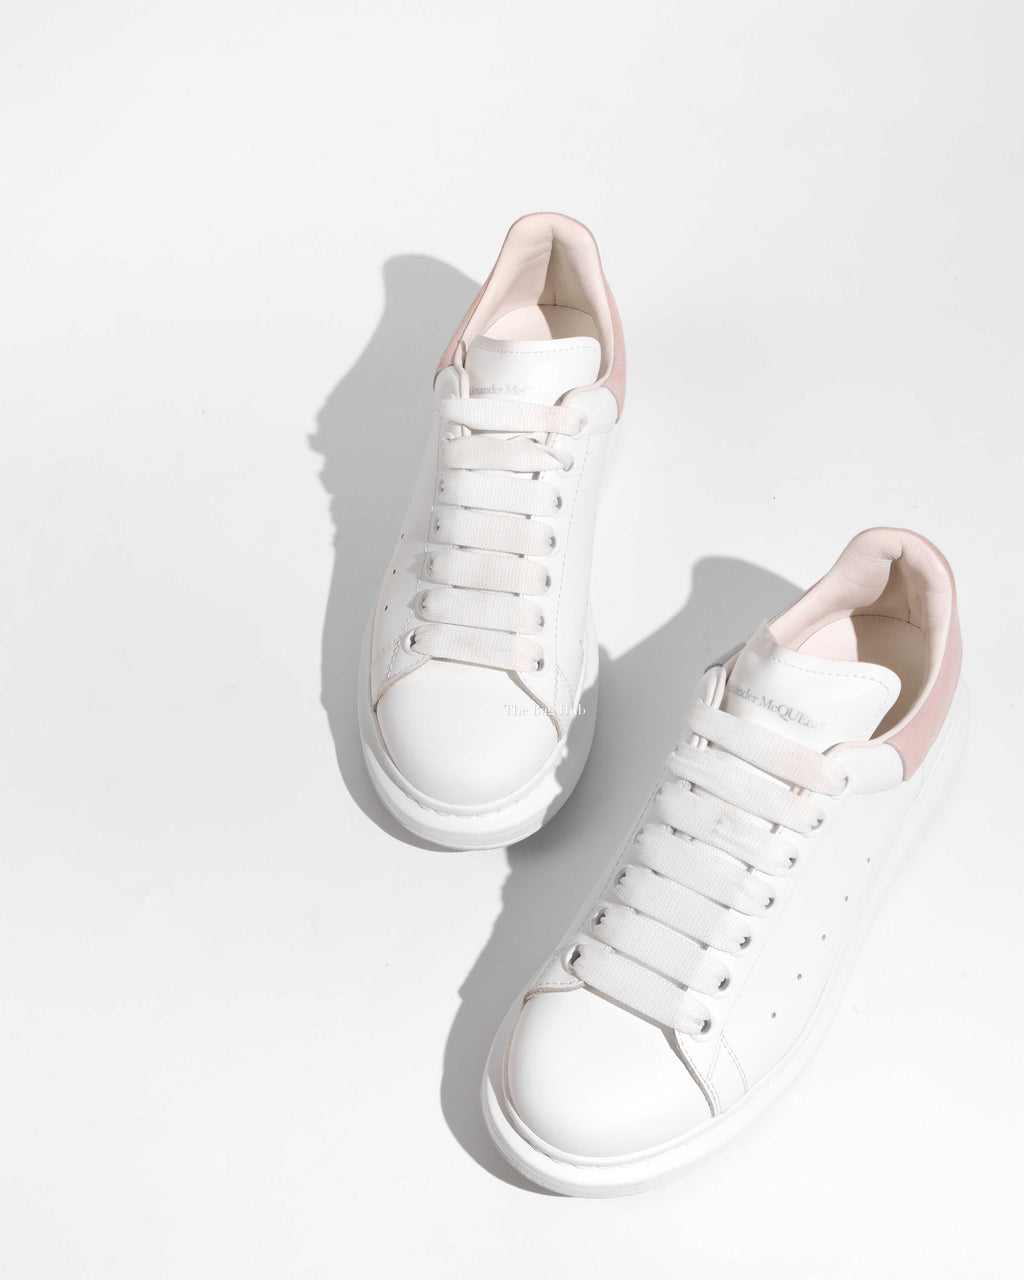 Alexander McQueen White & Pink Oversized Sneakers Size 37 - 1